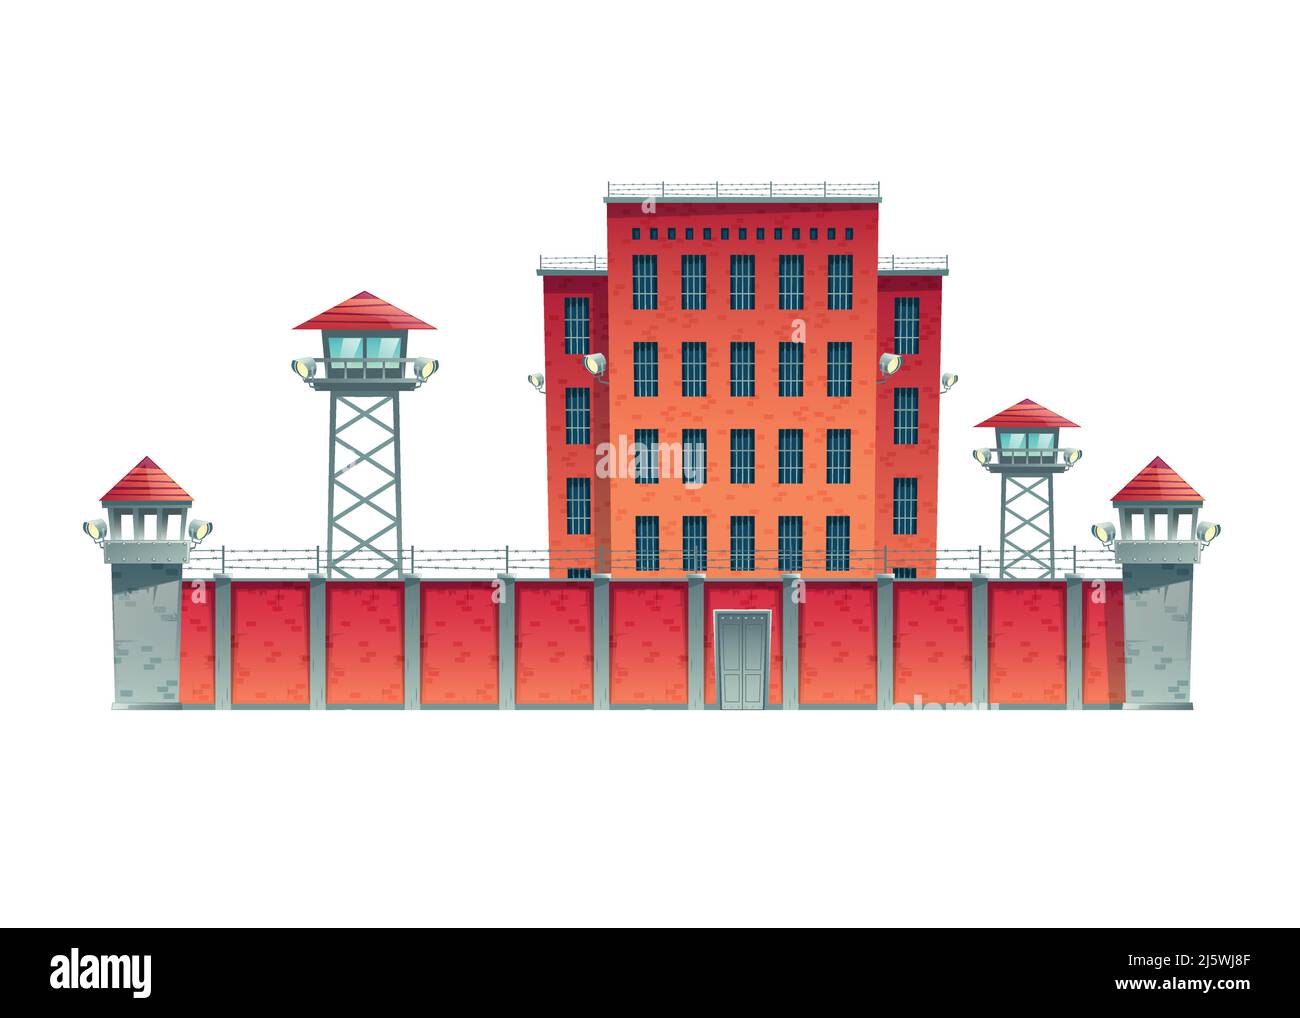 Prison, jail building fenced with guard observation posts on high fence with strained barbed wire and searchlights projectors on watchtowers cartoon v Stock Vector